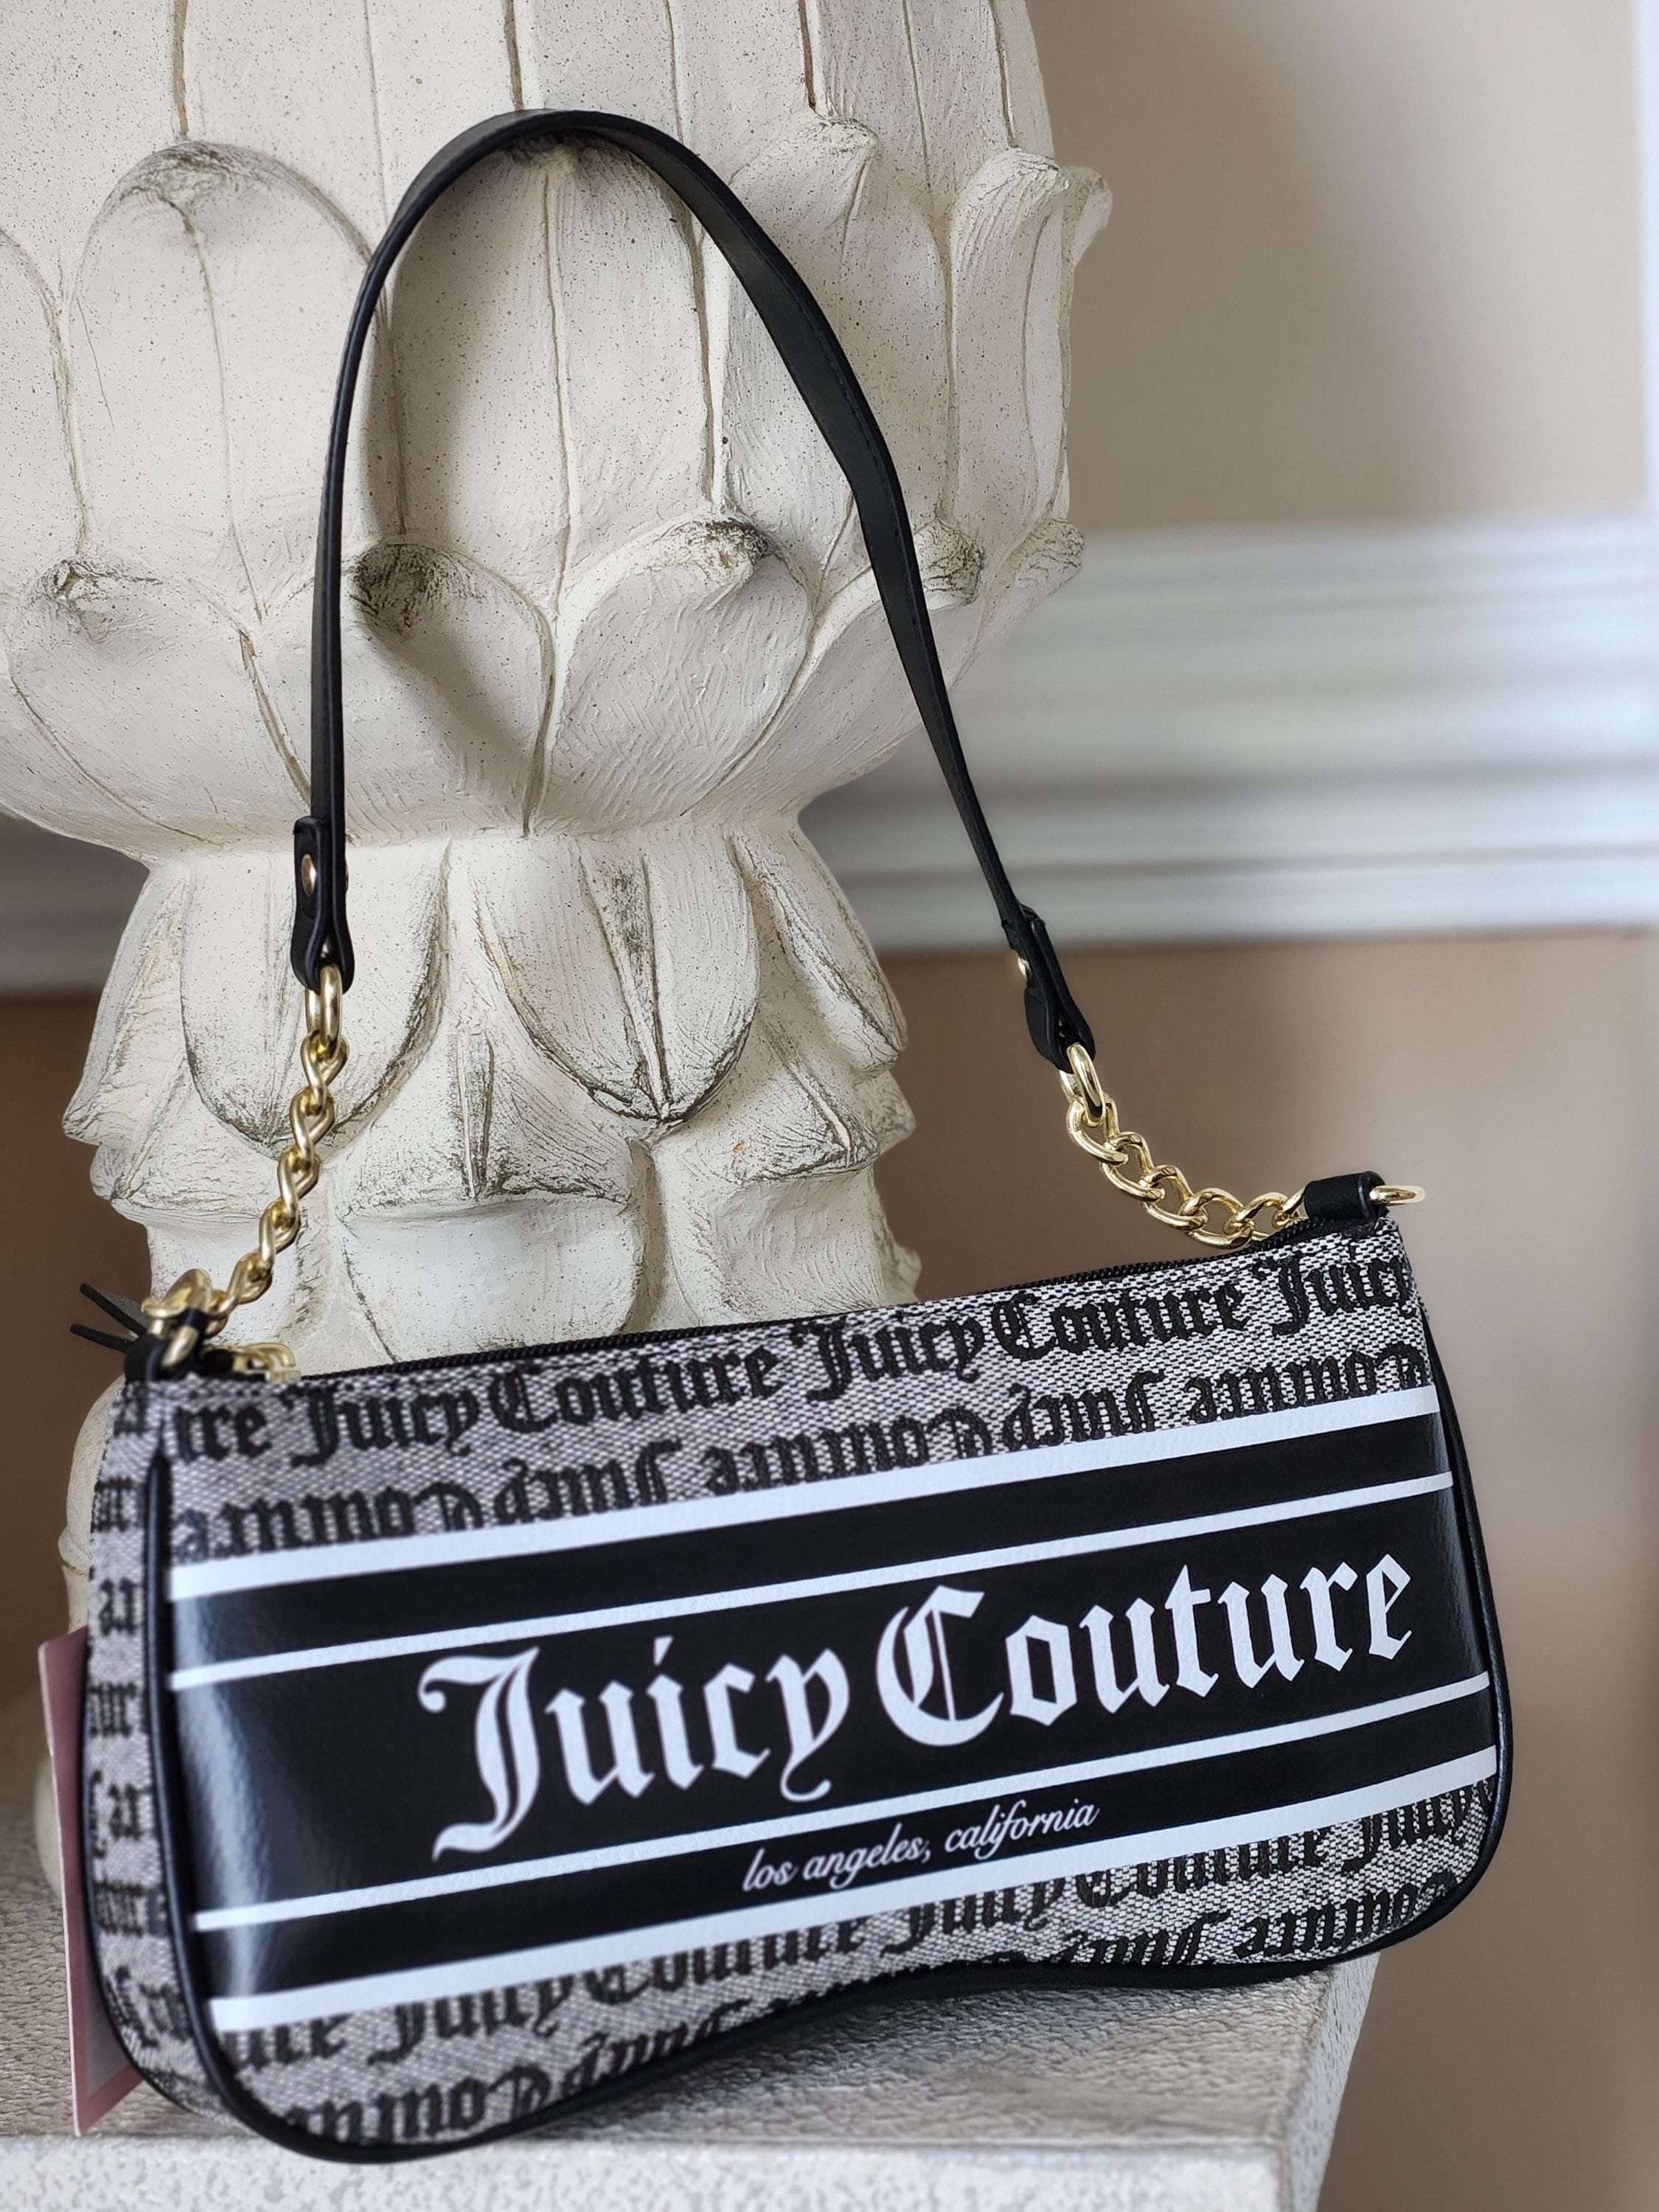 Juicy Couture Small Backpack French Latte Color Pullout Pouch BP